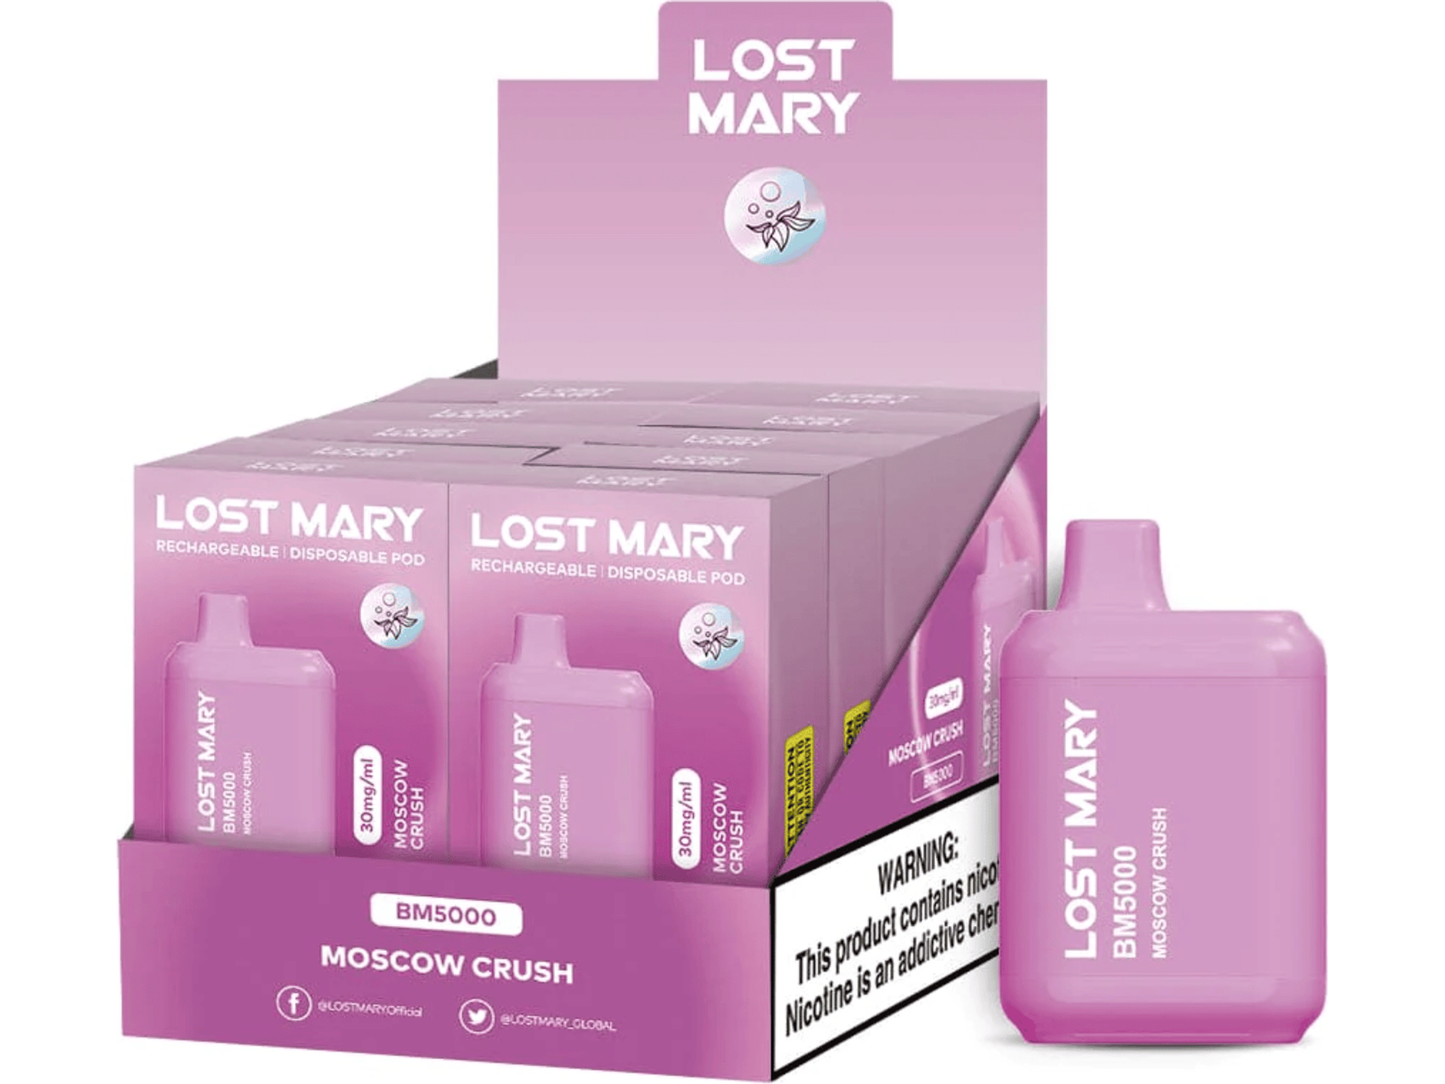 Lost Mary BM5000 Moscow Rush flavored disposable vape device and box.